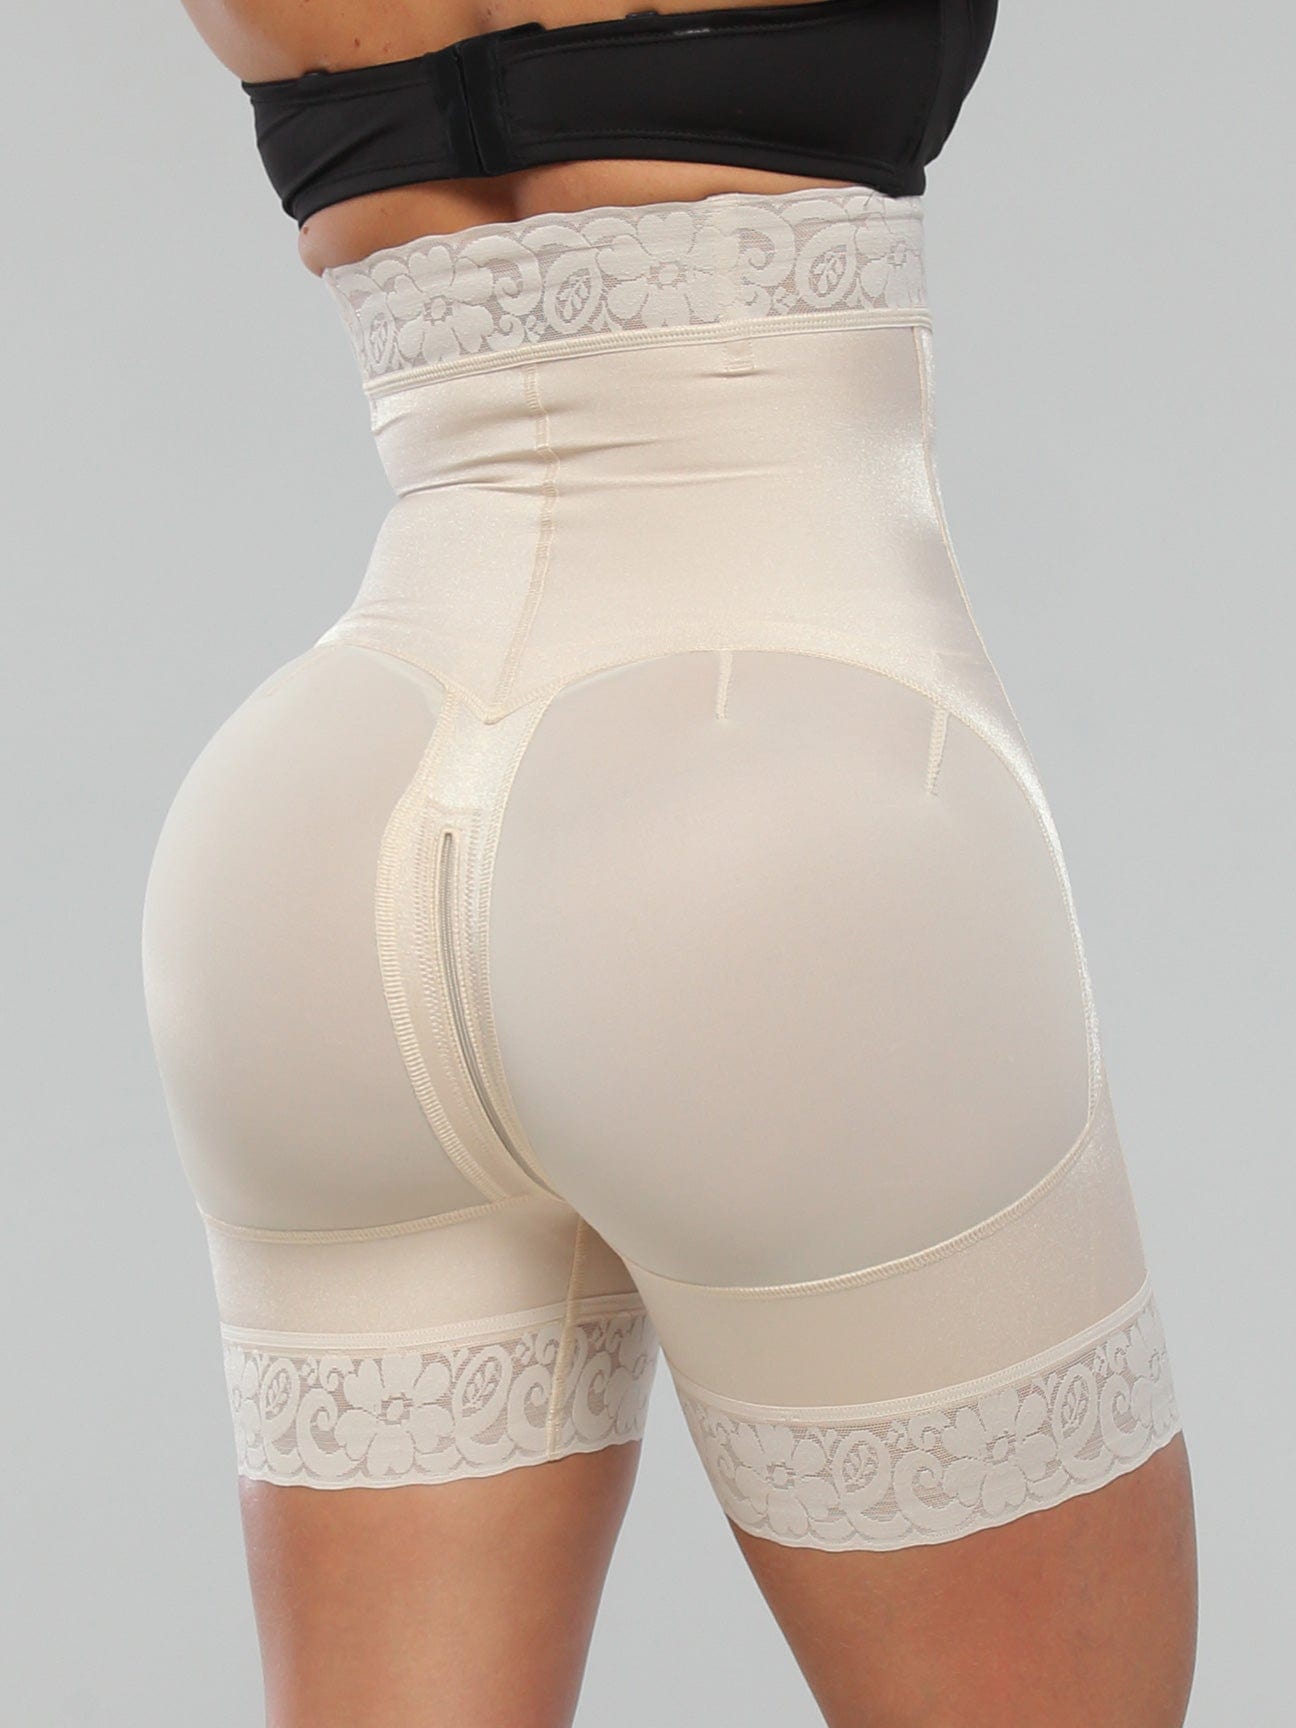 Invisible Short and Waist Shaper CB198